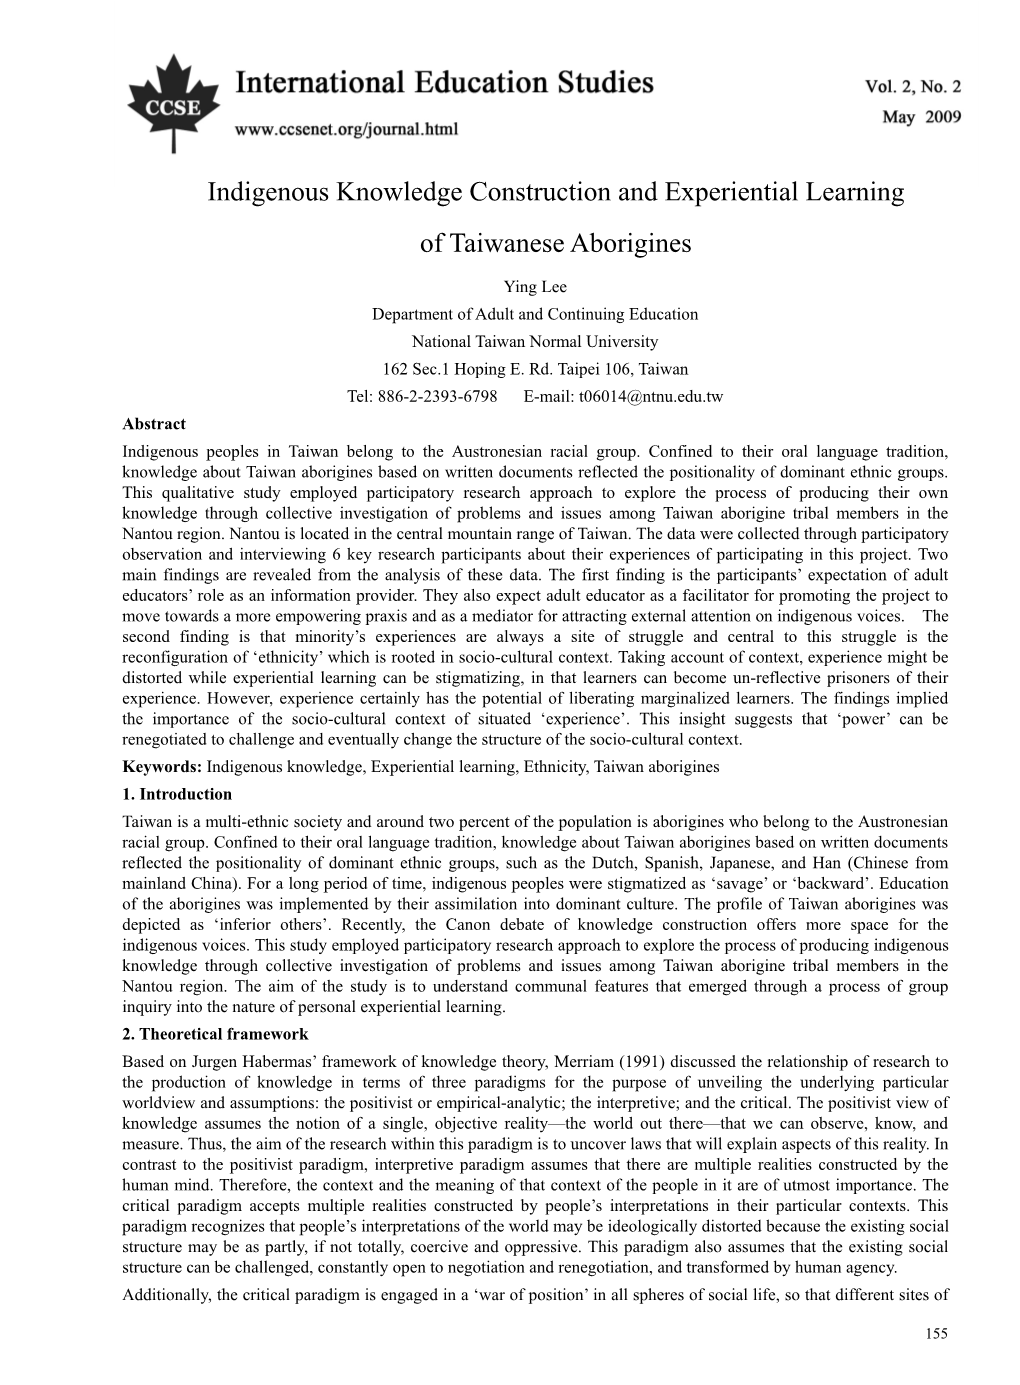 Indigenous Knowledge Construction and Experiential Learning of Taiwanese Aborigines